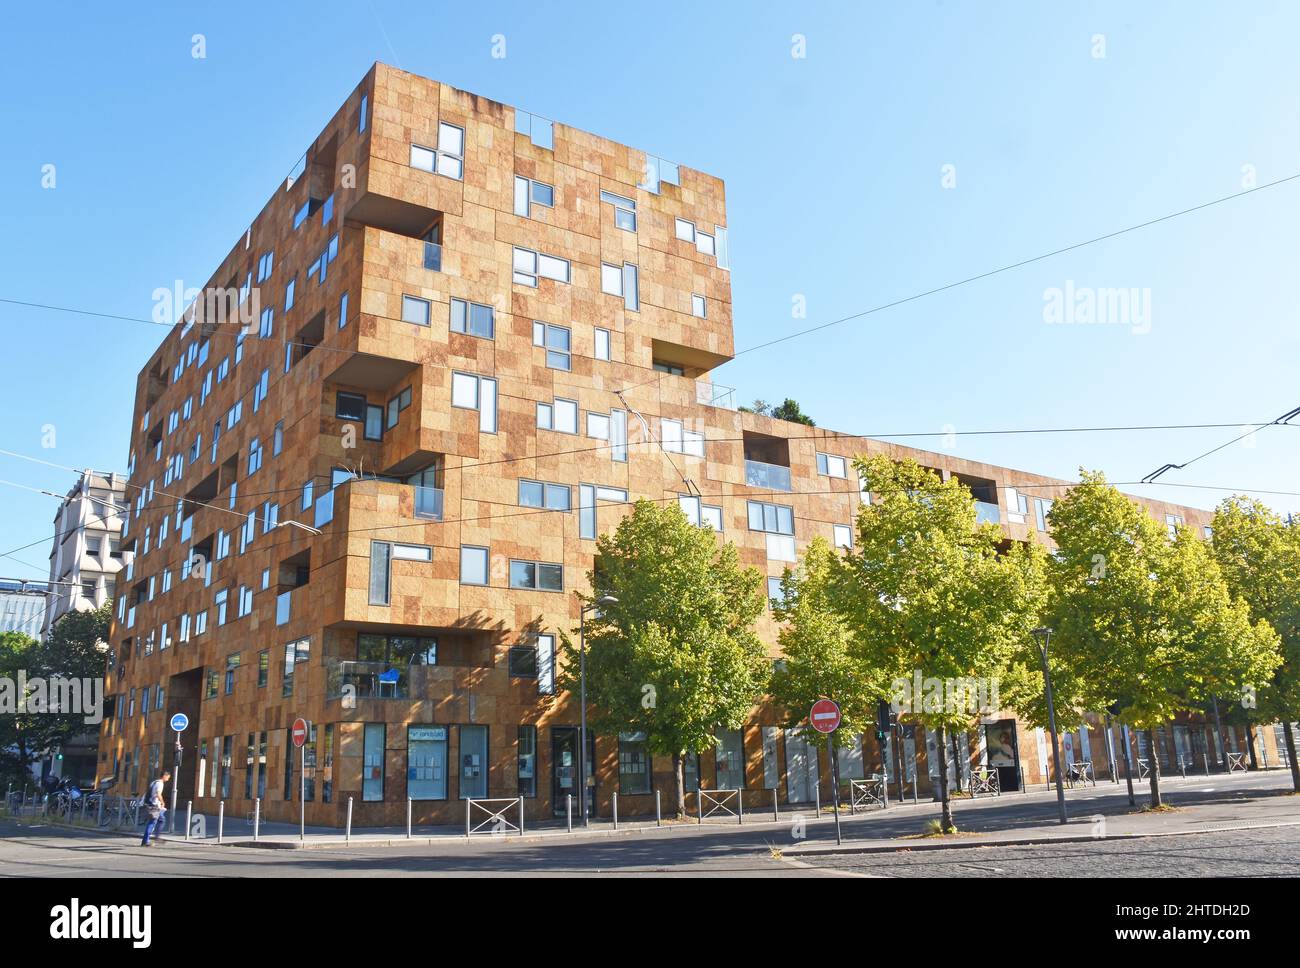 Square Pey Berland, a large modern apartment building in Bordeaux,  mostly 8 storeys, something of a Lego-look, various shades of brown stone cladding Stock Photo